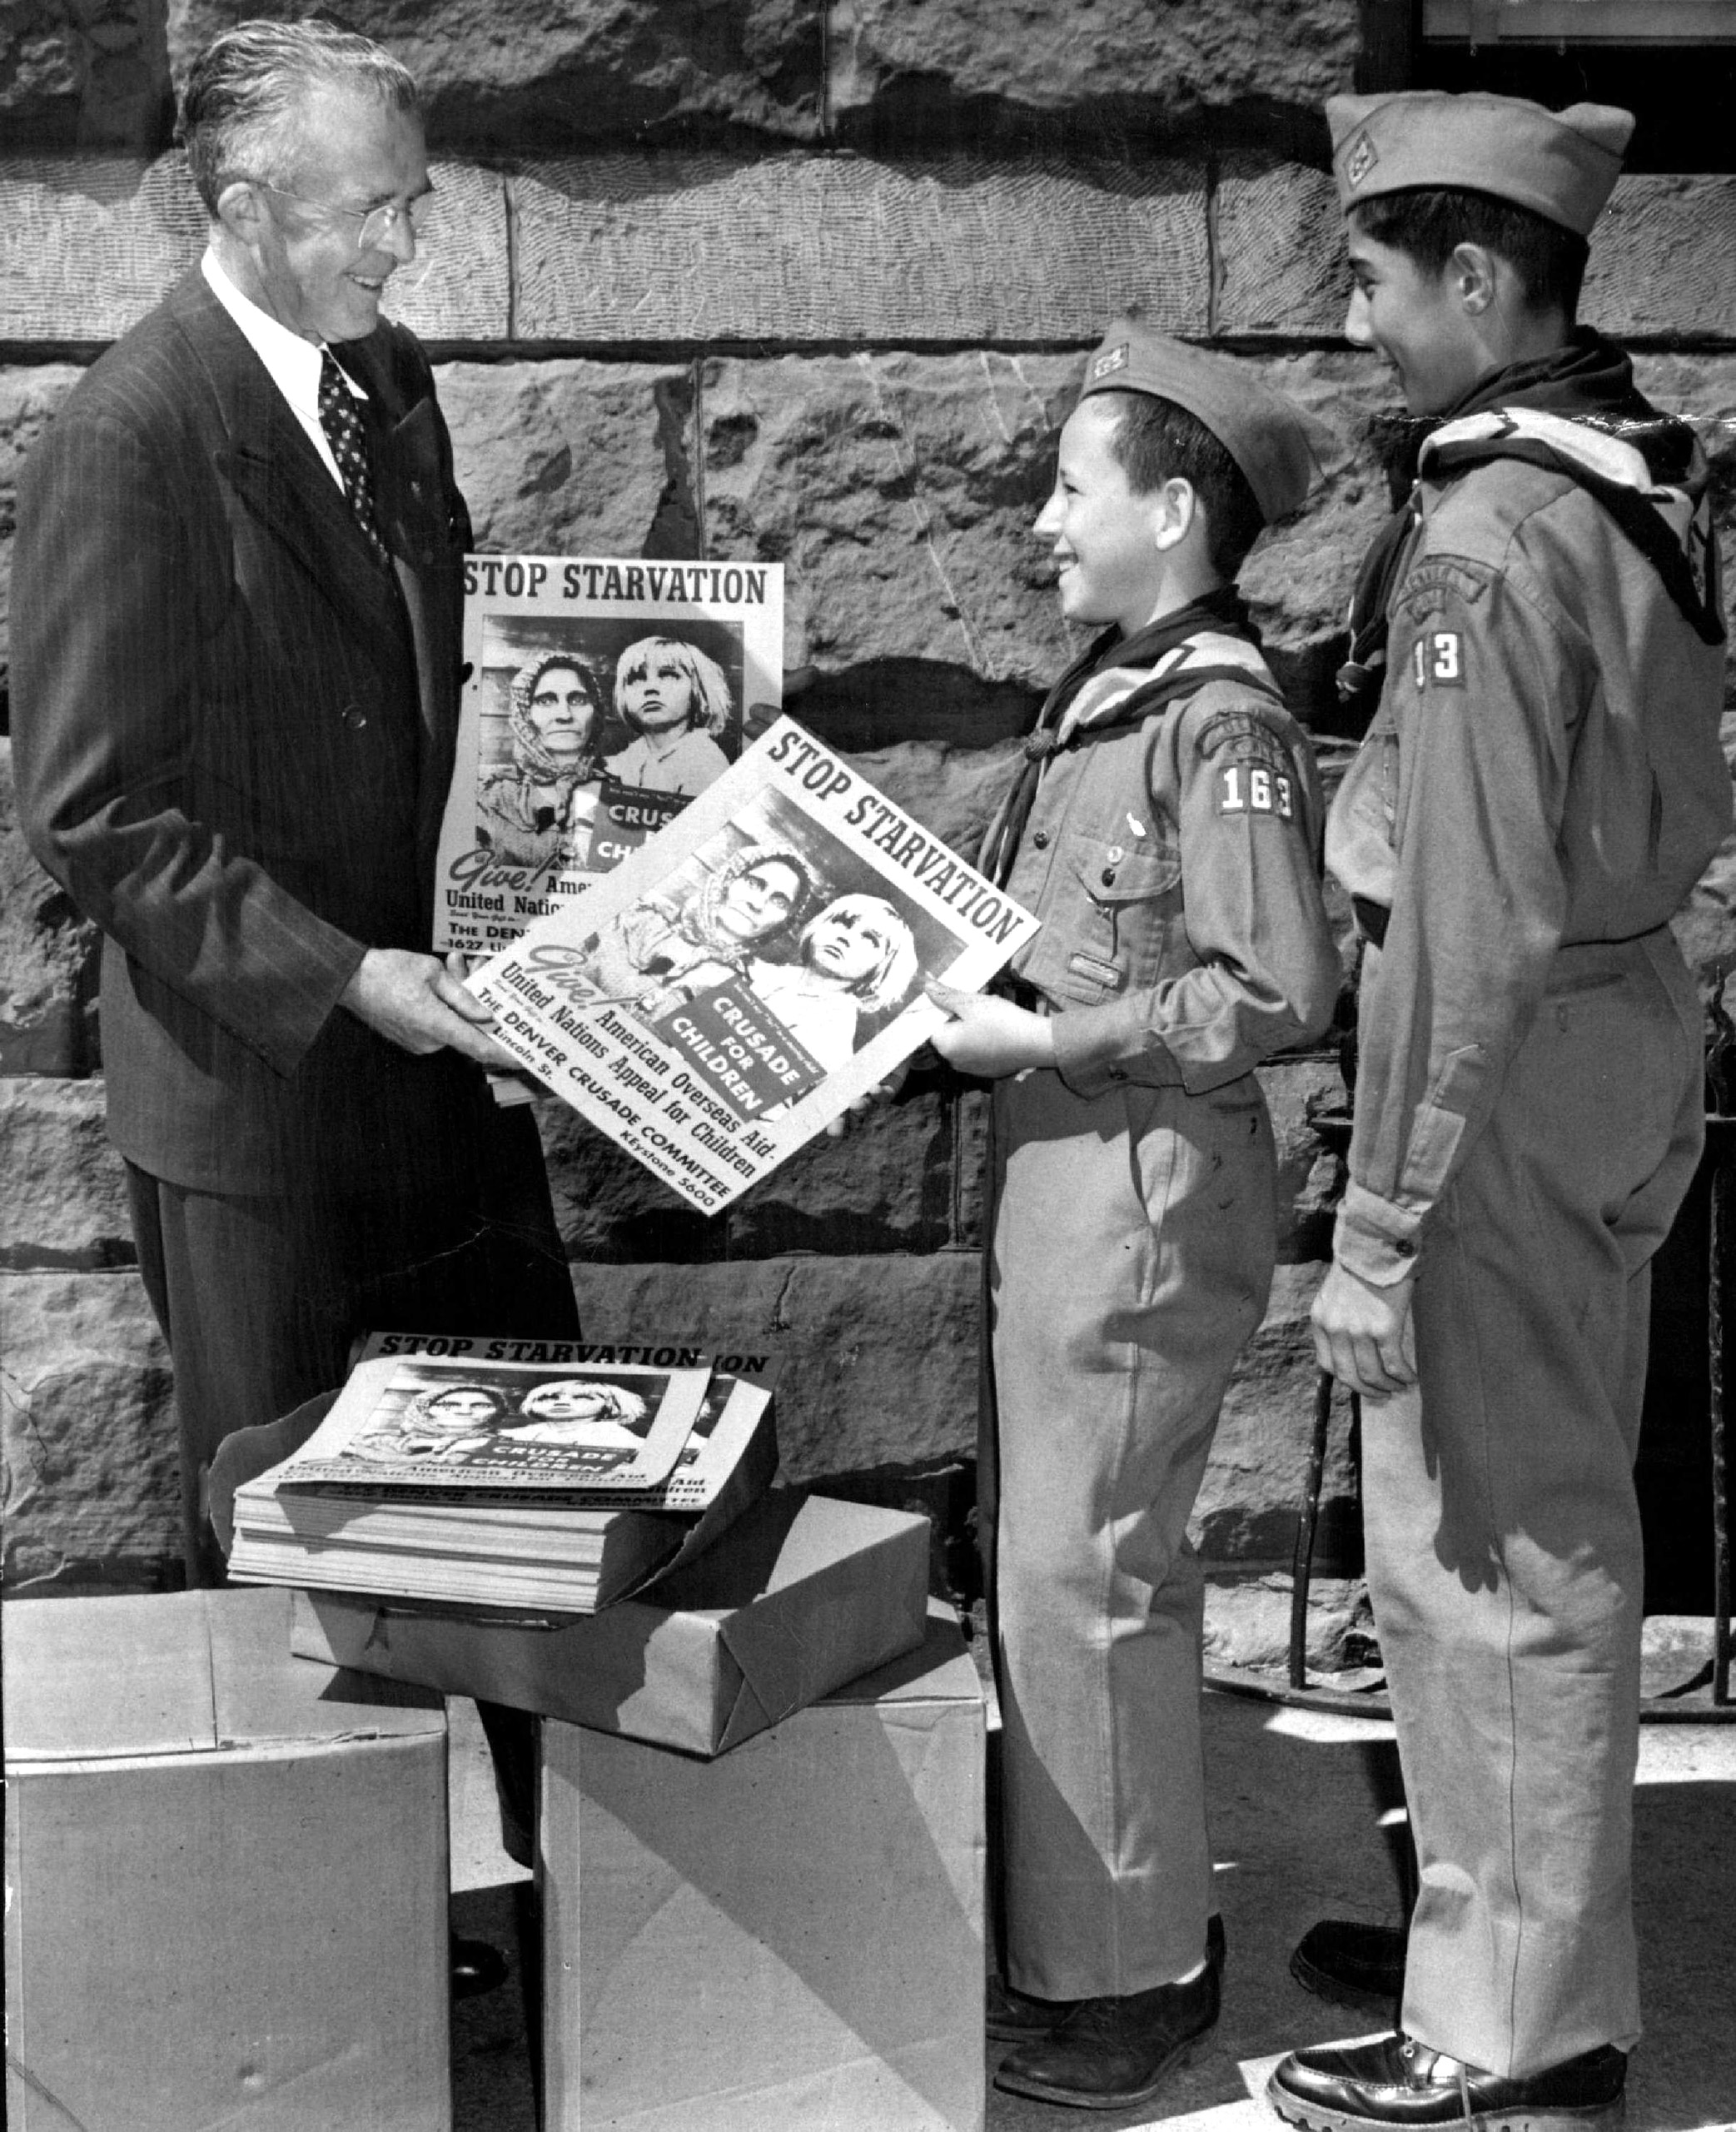 Denver Boy Scouts distributing posters to push campaign for aid to 230 million overseas children in desperate need of help. 1948.